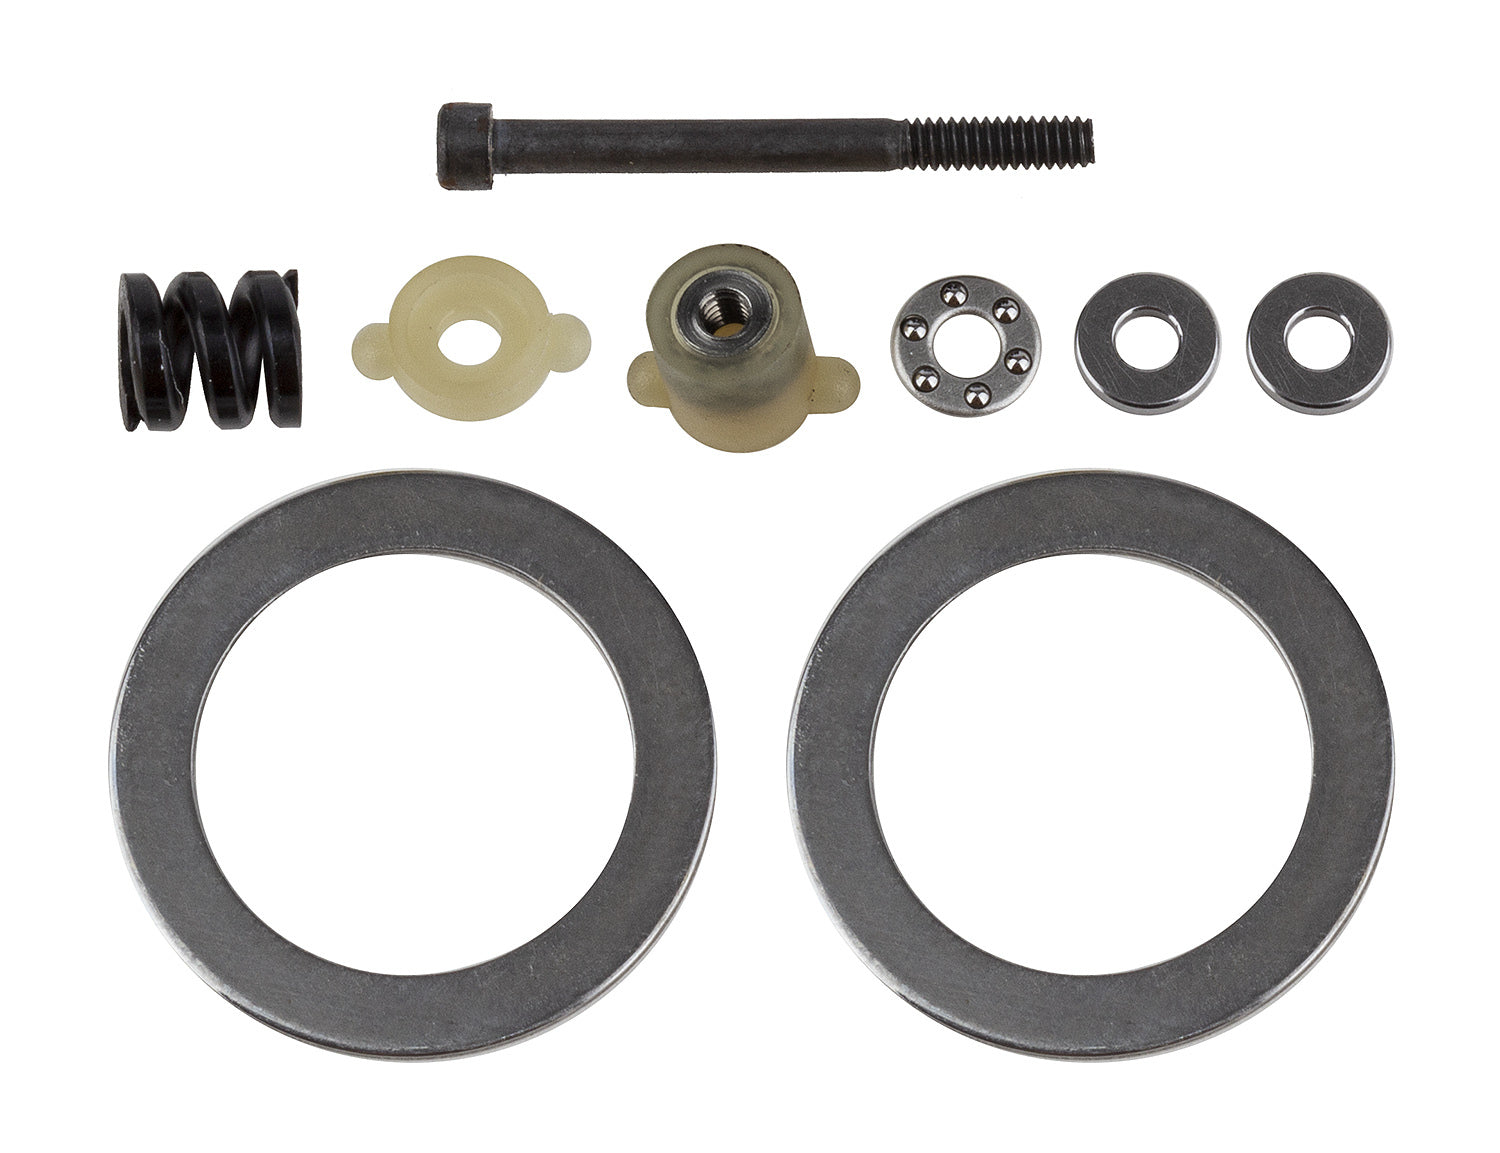 Team Associated RC10B6 Ball Differential Rebuild Kit with Caged Thrust Bearing - [Sunshine-Coast] - Team Associated - [RC-Car] - [Scale-Model]